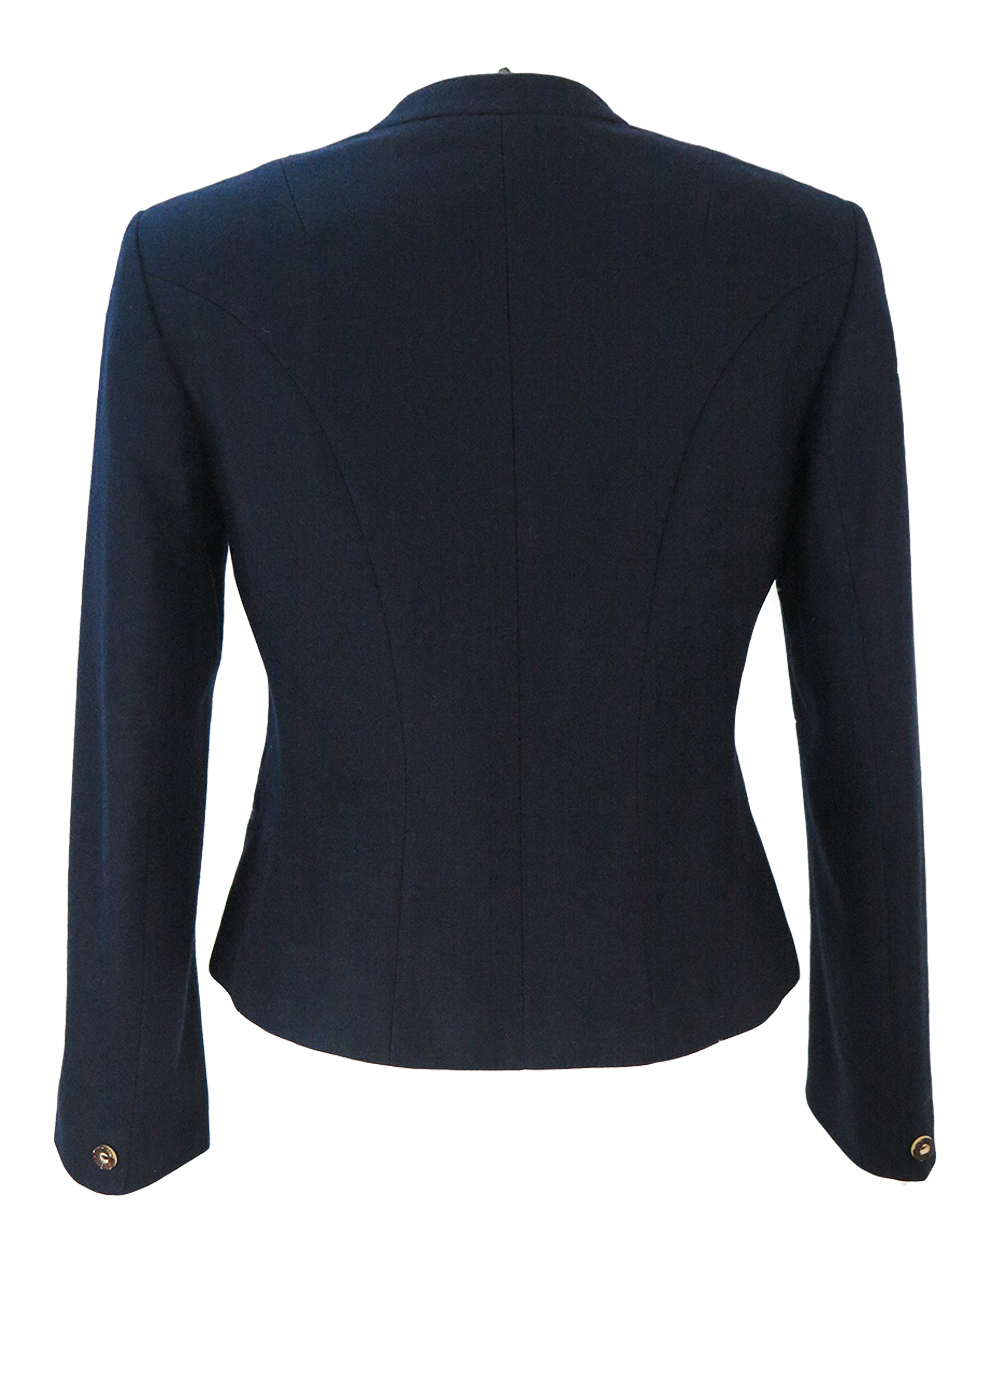 Navy Blue Tyrolean Fitted Jacket with Light Blue Decorative Stitch ...